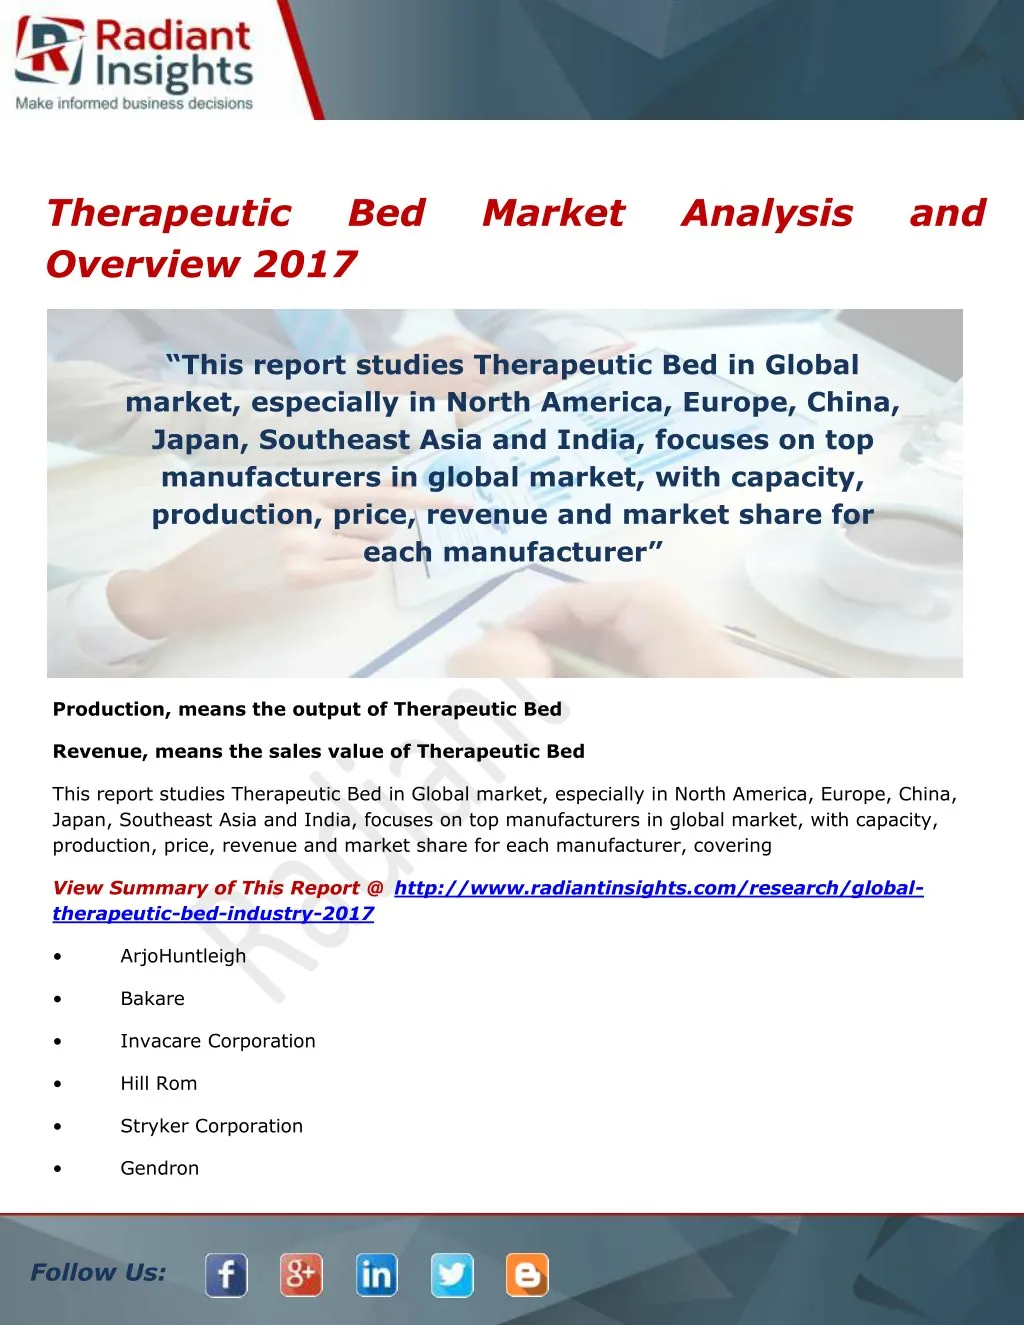 therapeutic overview 2017